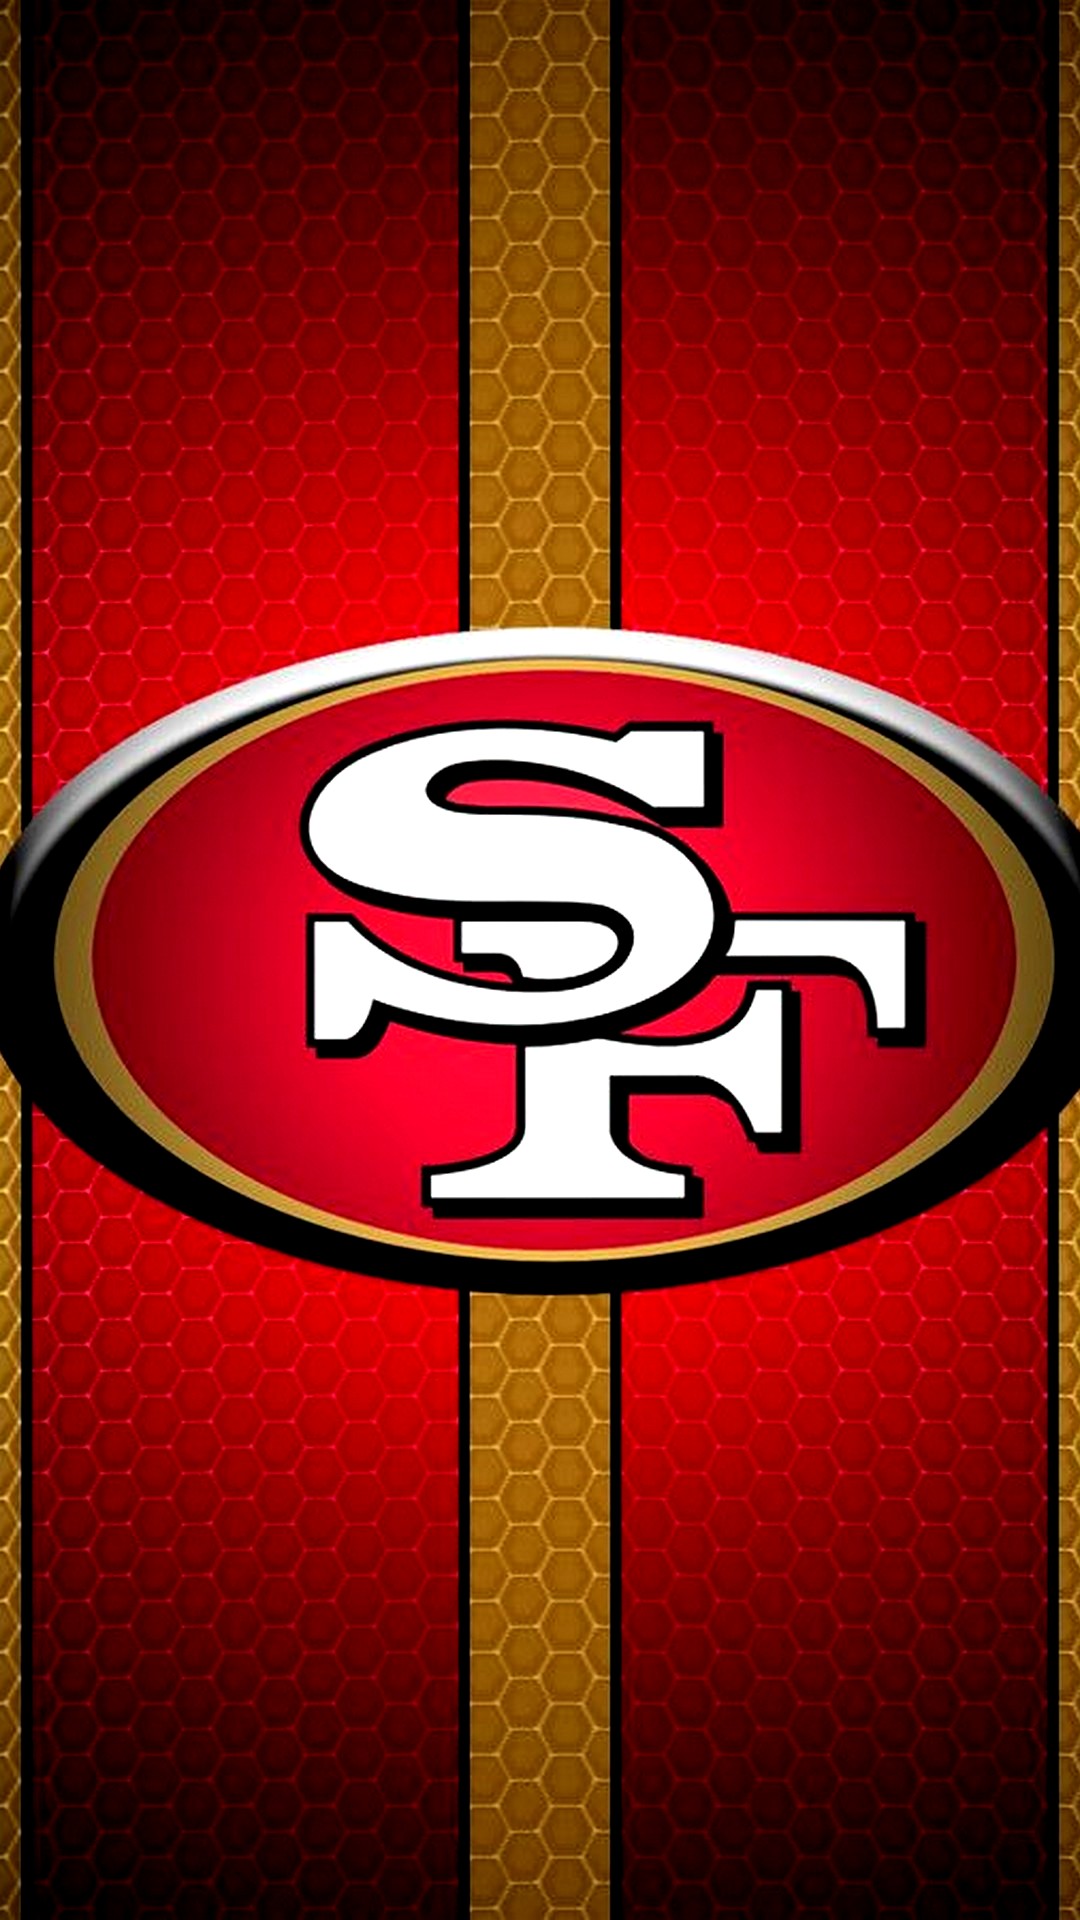 49ers HD Wallpaper For iPhone With high-resolution 1080X1920 pixel. You can use this wallpaper for your Mac or Windows Desktop Background, iPhone, Android or Tablet and another Smartphone device